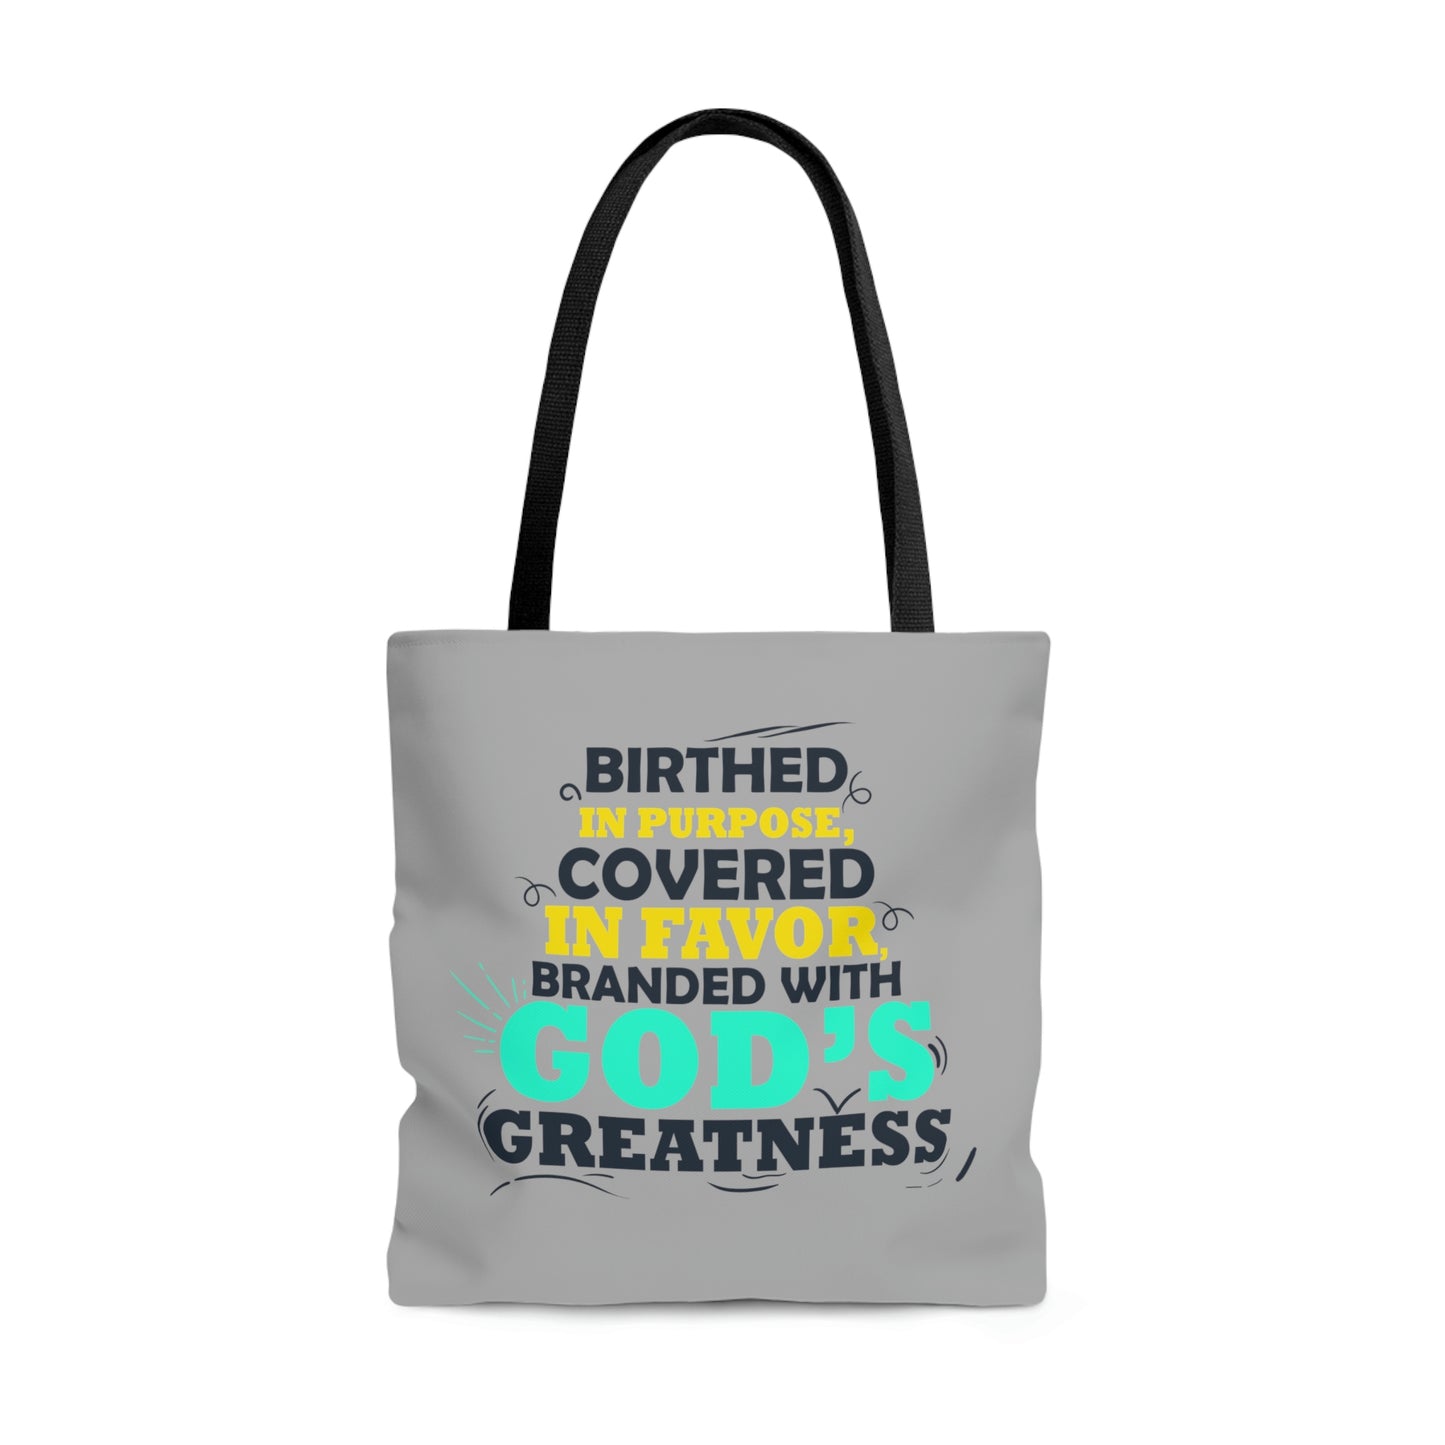 Birthed In Purpose, Covered In Favor, Branded With God's Greatness  Tote Bag